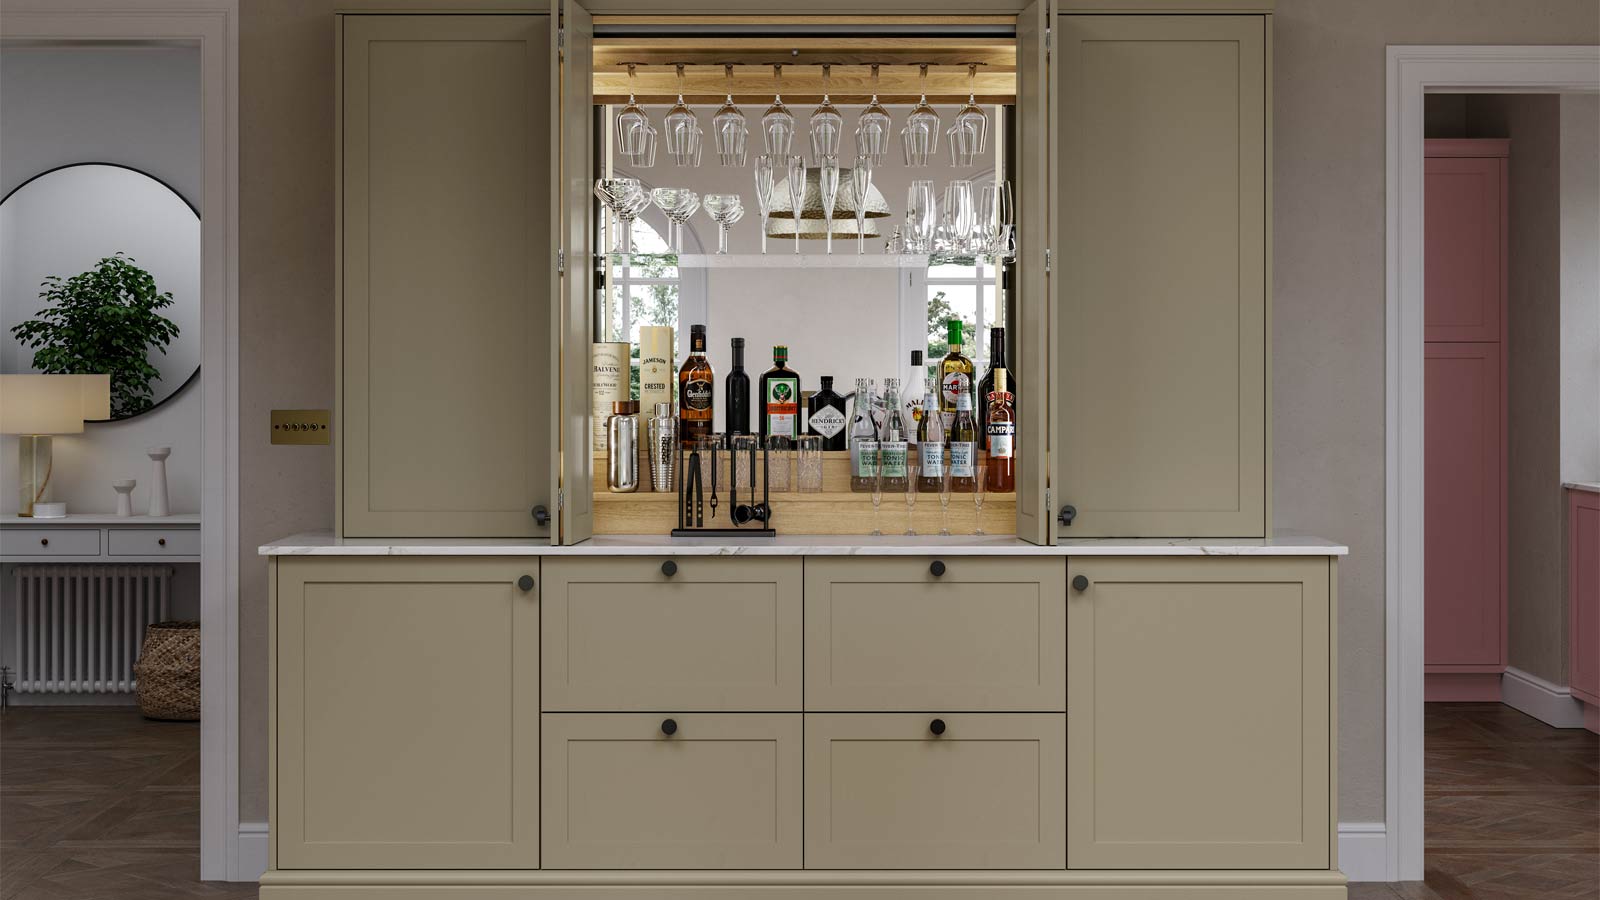 A kitchen dresser unit with a hanging wine glass rack and a drinks shelf